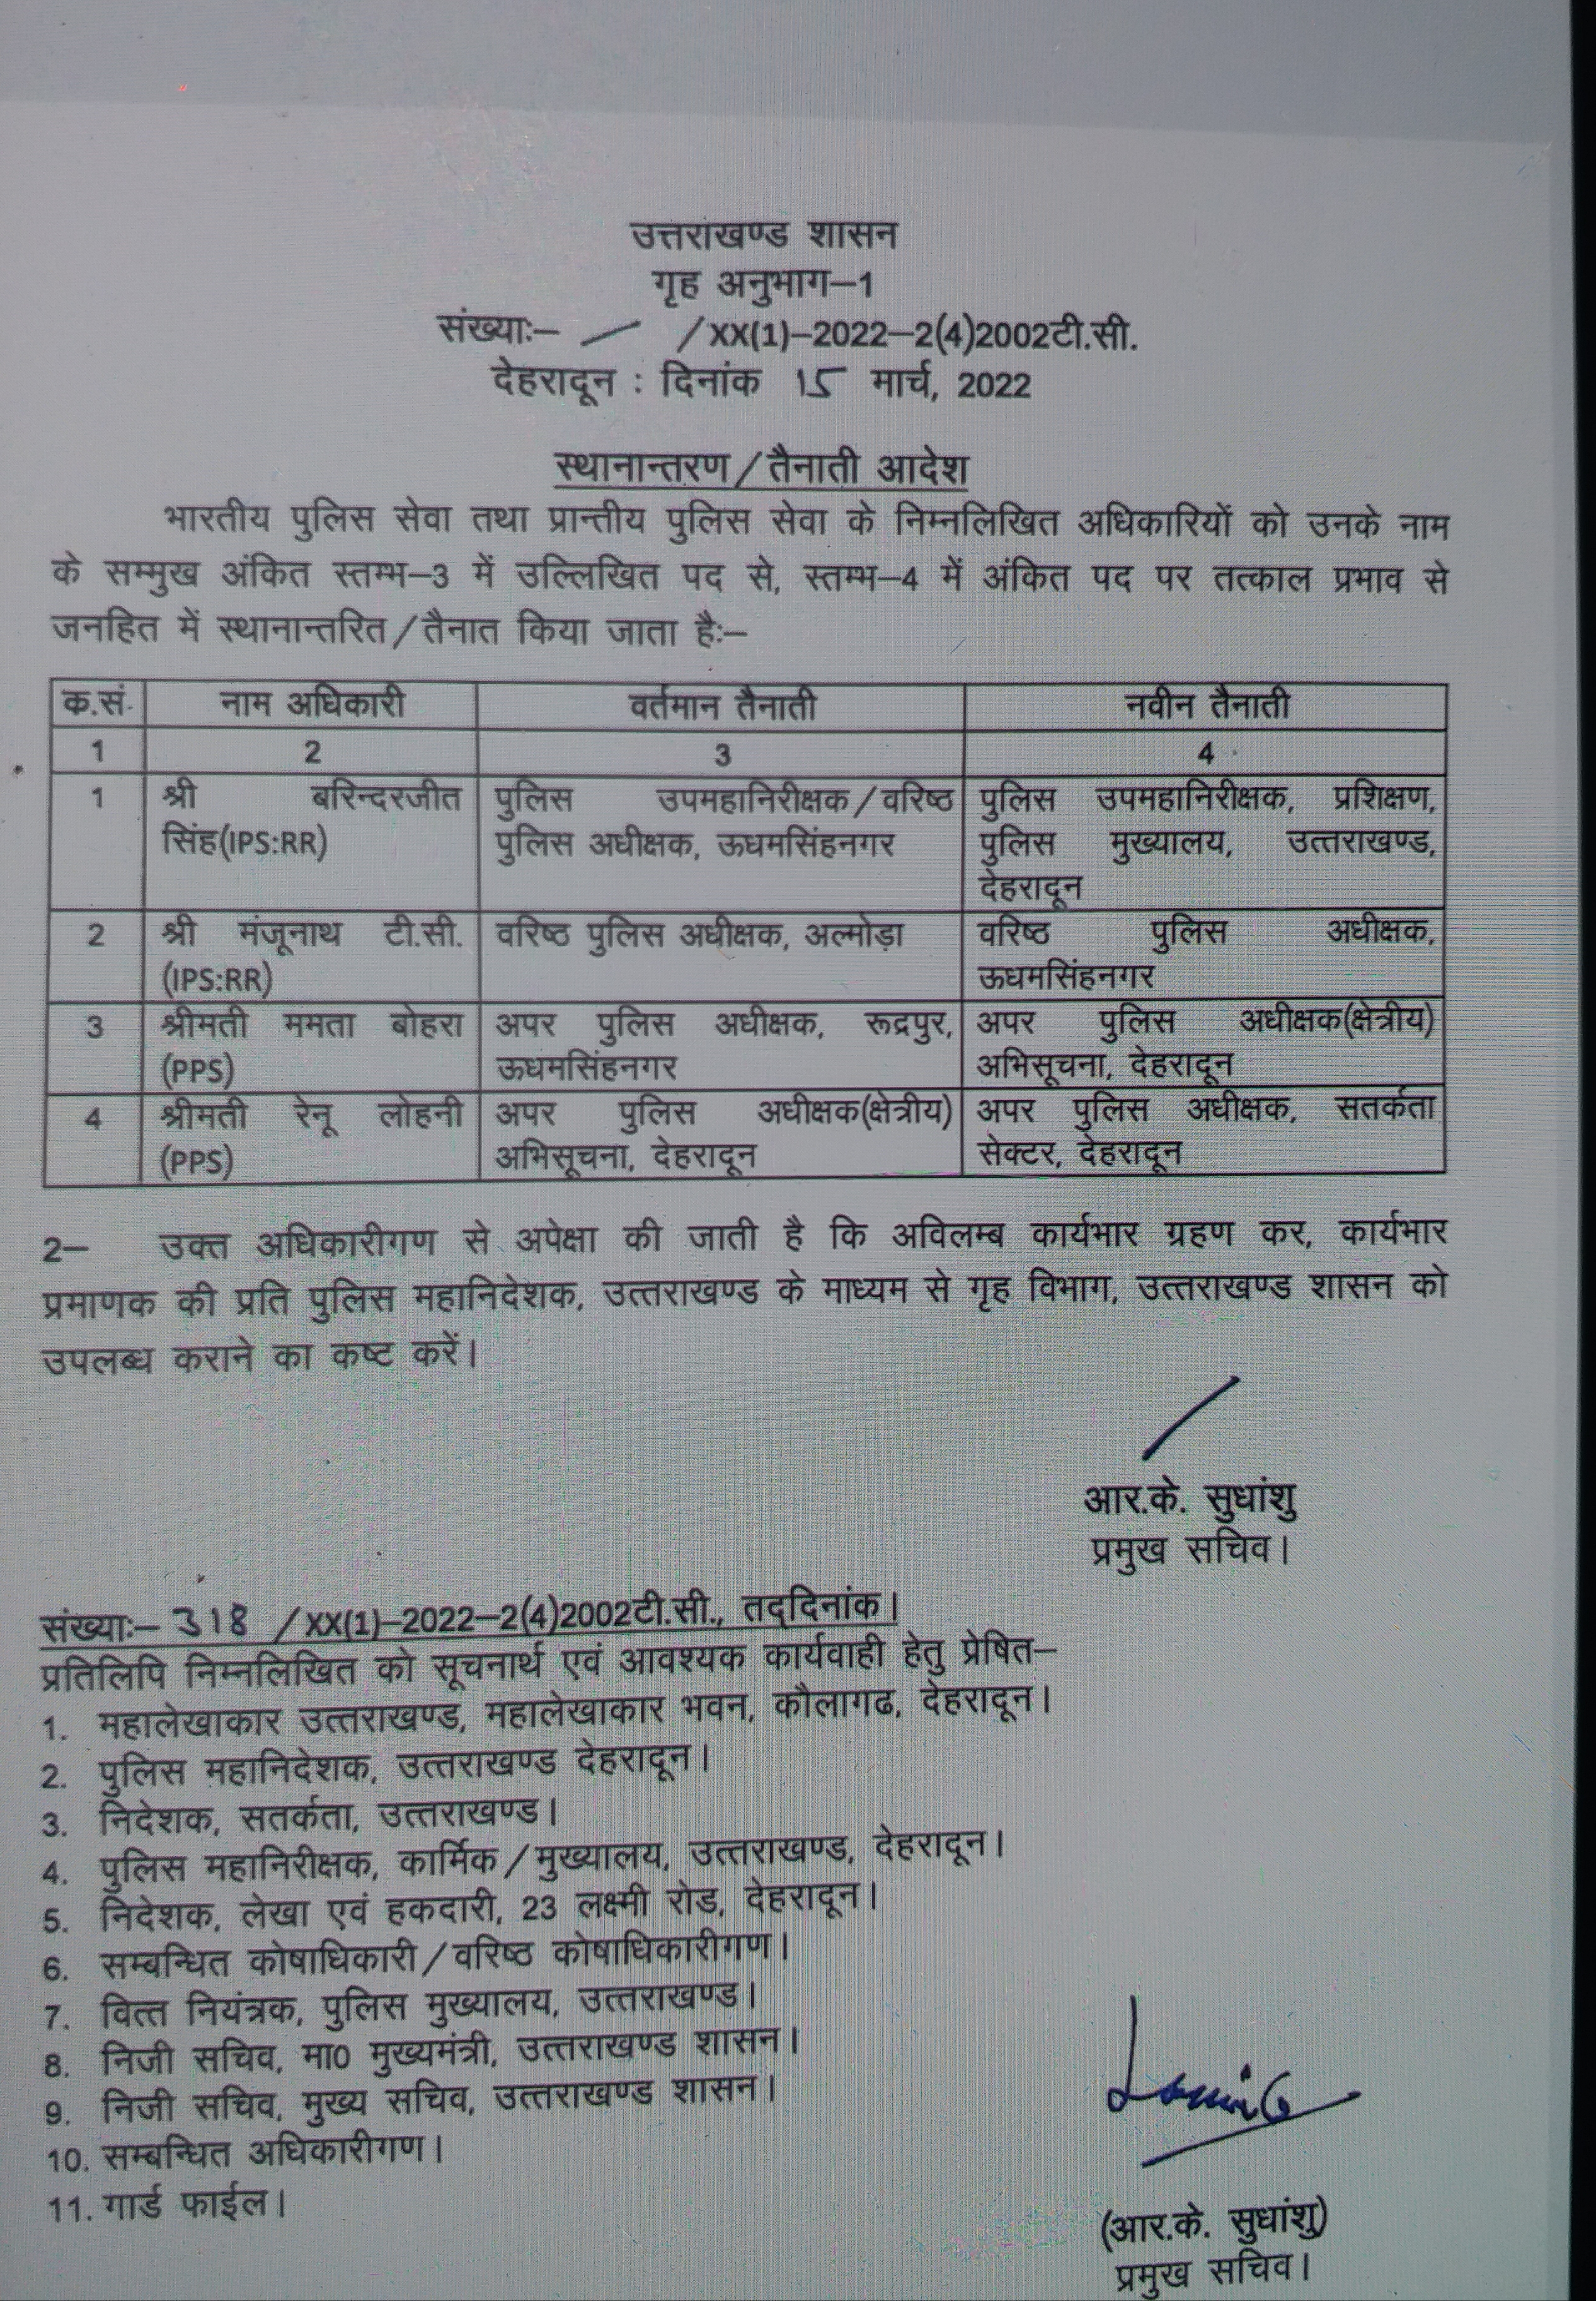 Police officers transferred